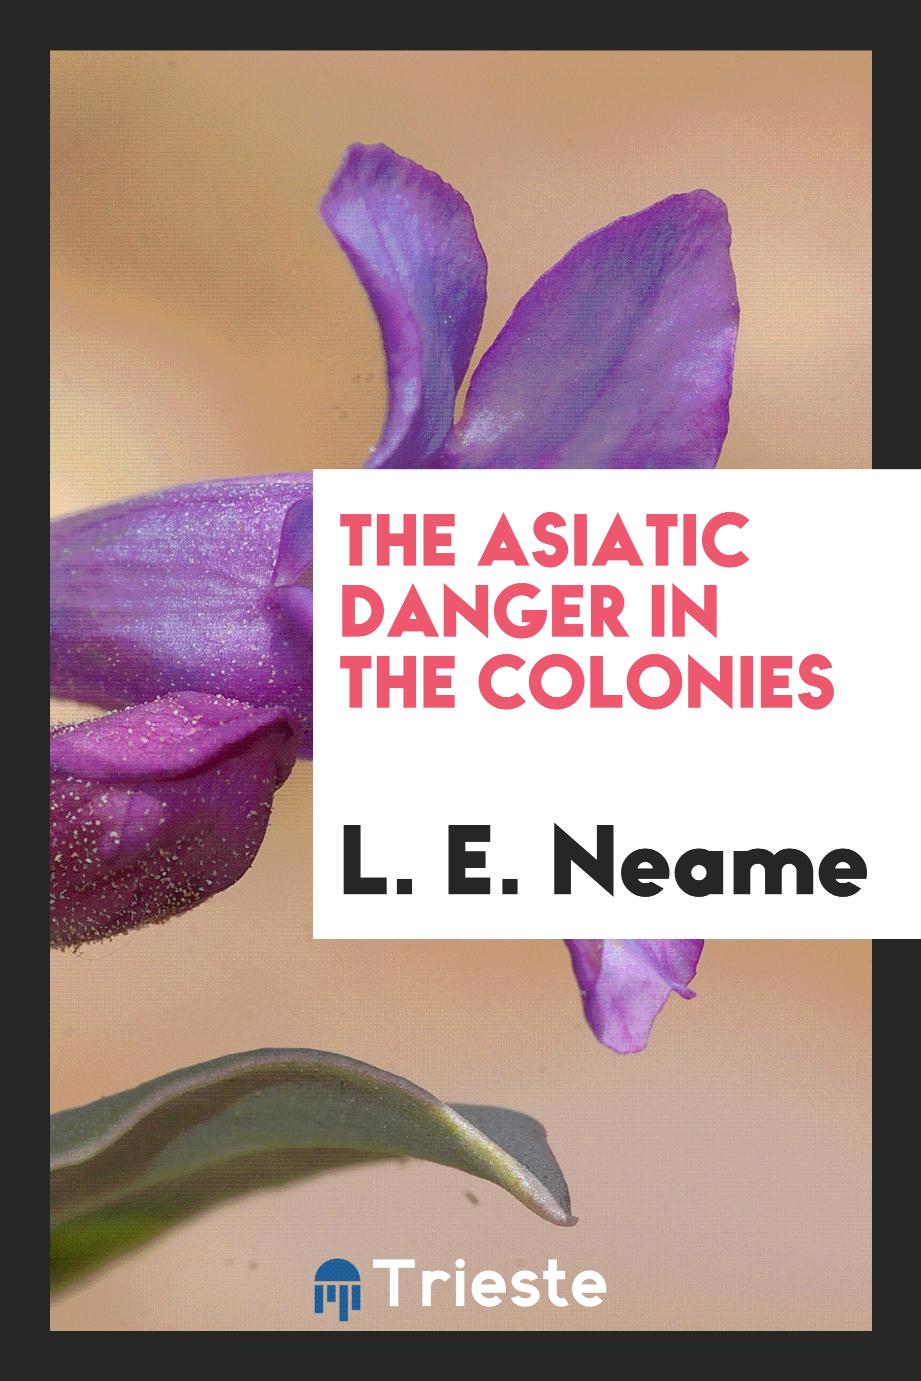 The Asiatic danger in the colonies